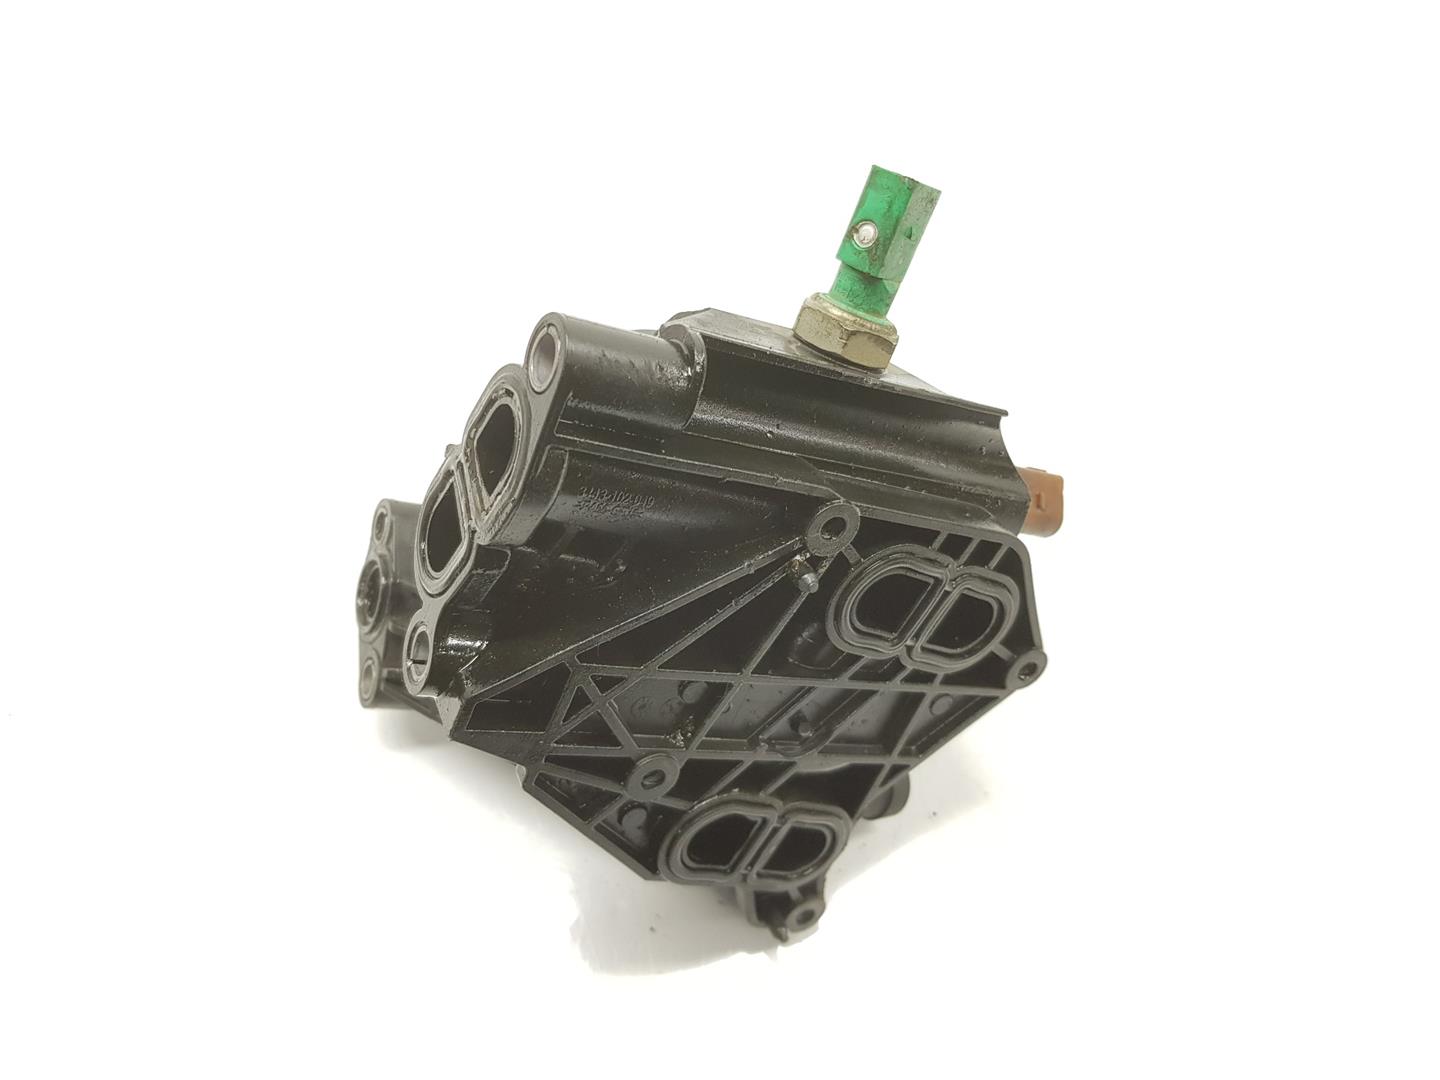 SEAT Leon 3 generation (2012-2020) Other Engine Compartment Parts 03N115389A, 03N115389A 19905024